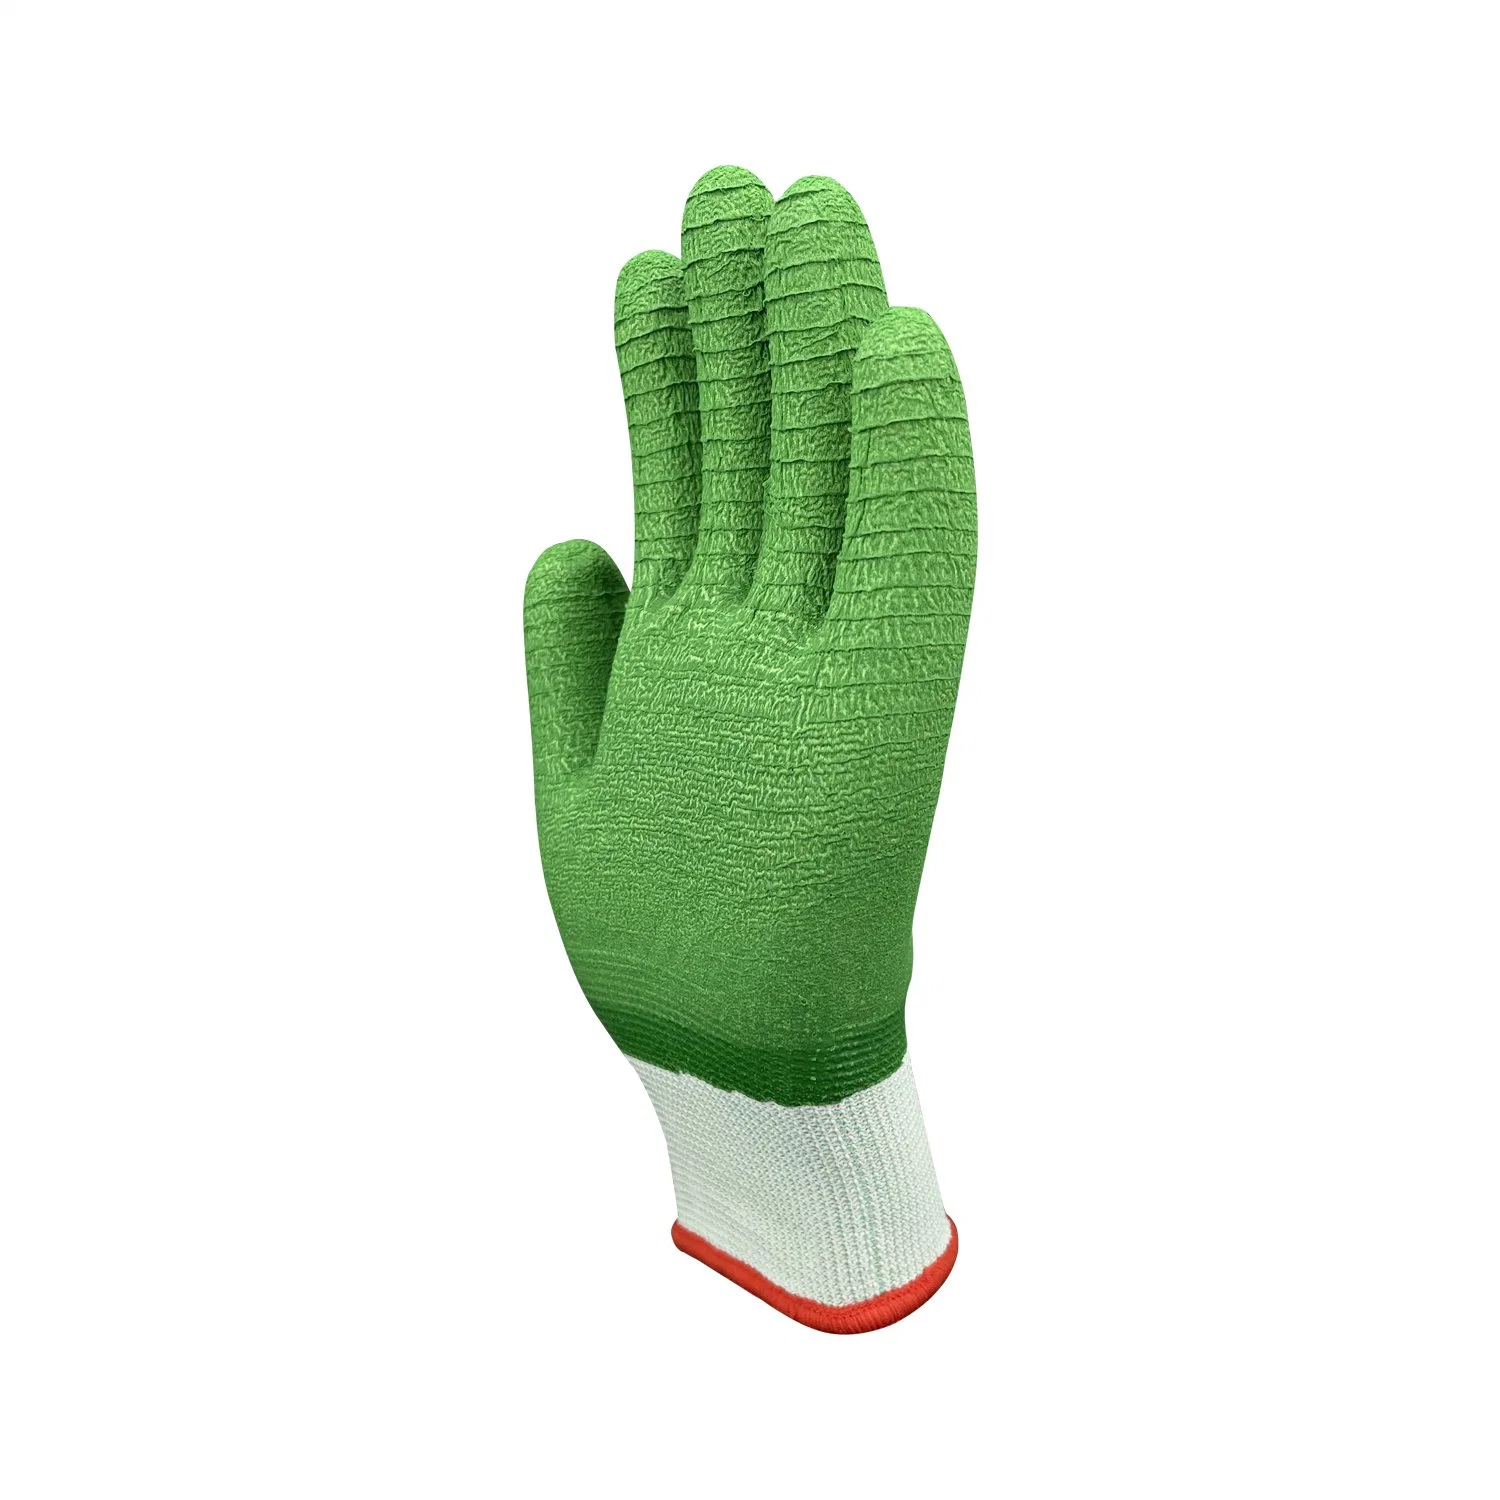 Industrial Rubber Work Knitted Household Safety Latex Coated Glove